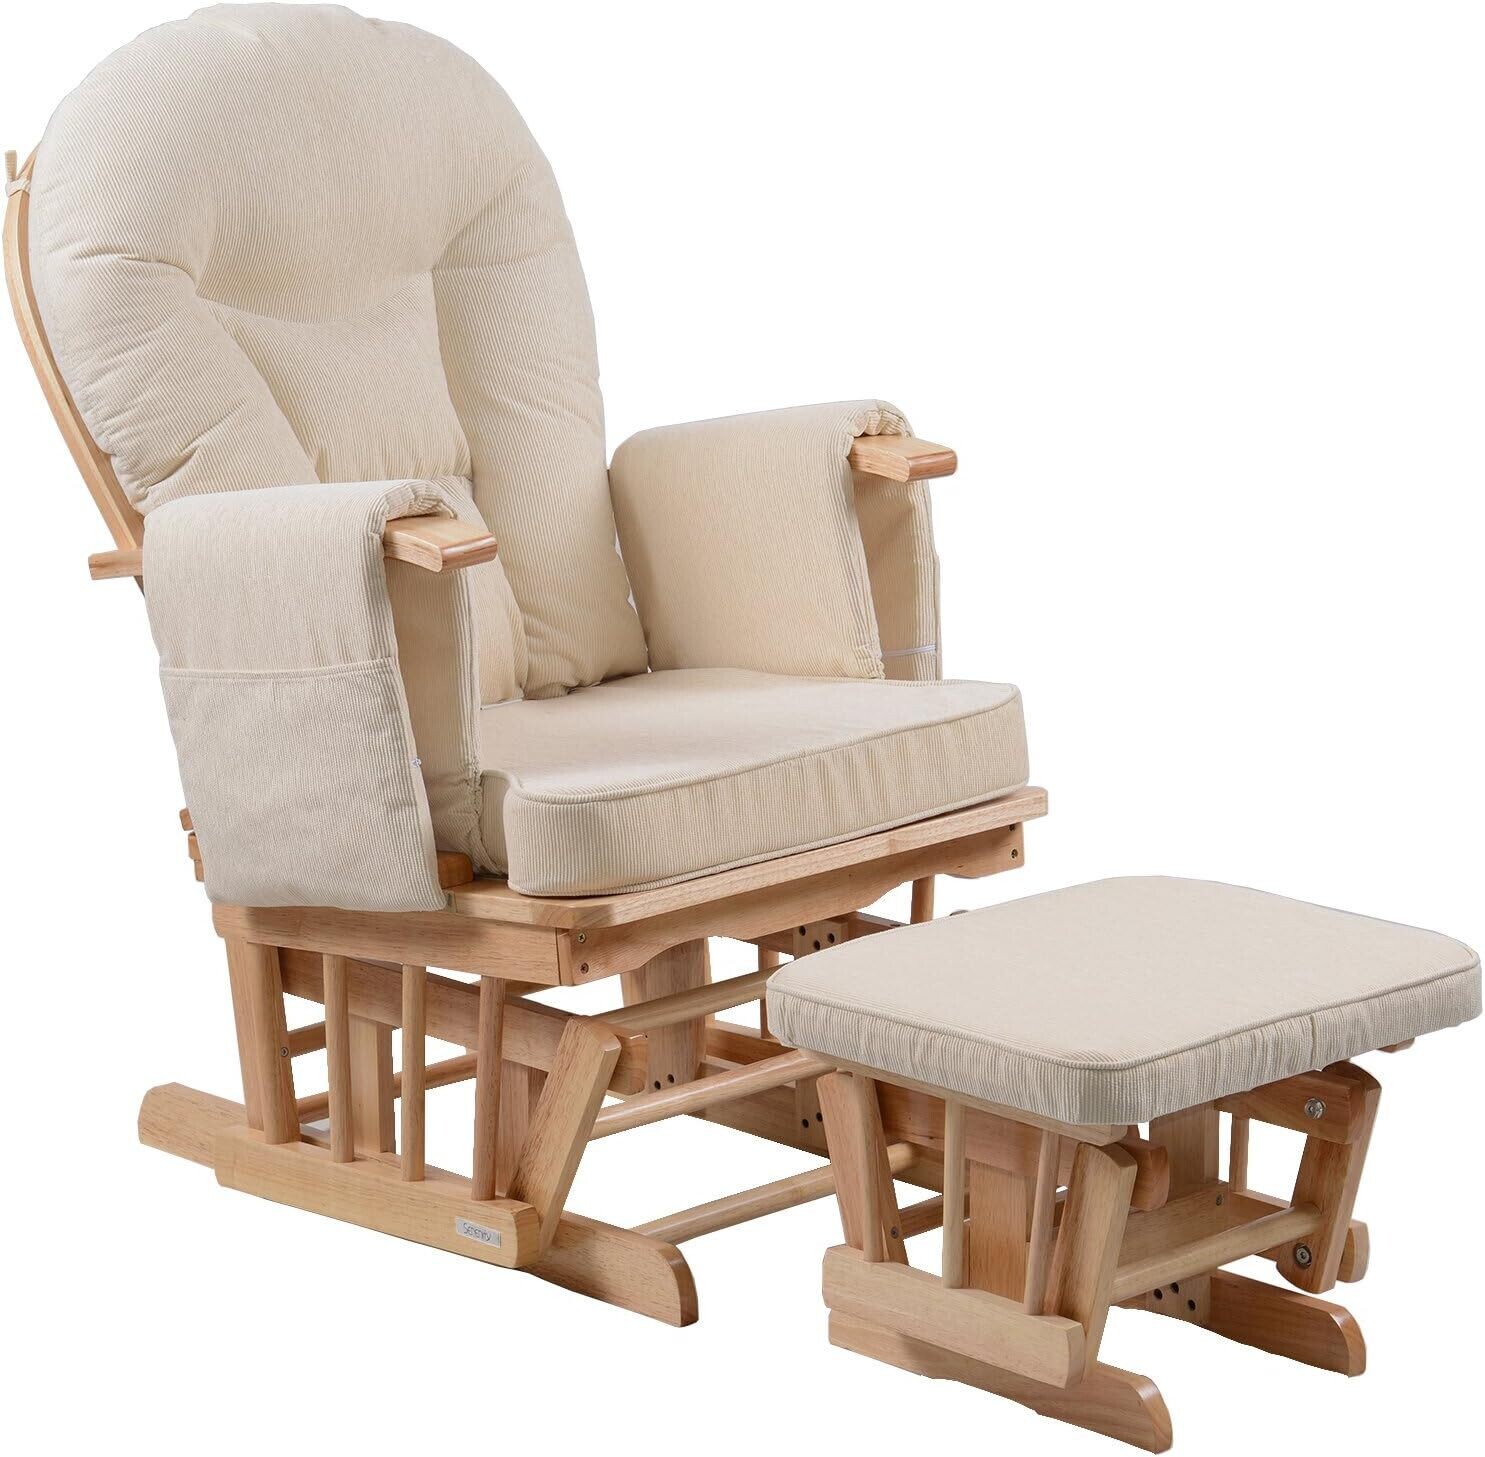 Relaxation/Nursing Chair With Stool , Adjustable Reclining Back Rest